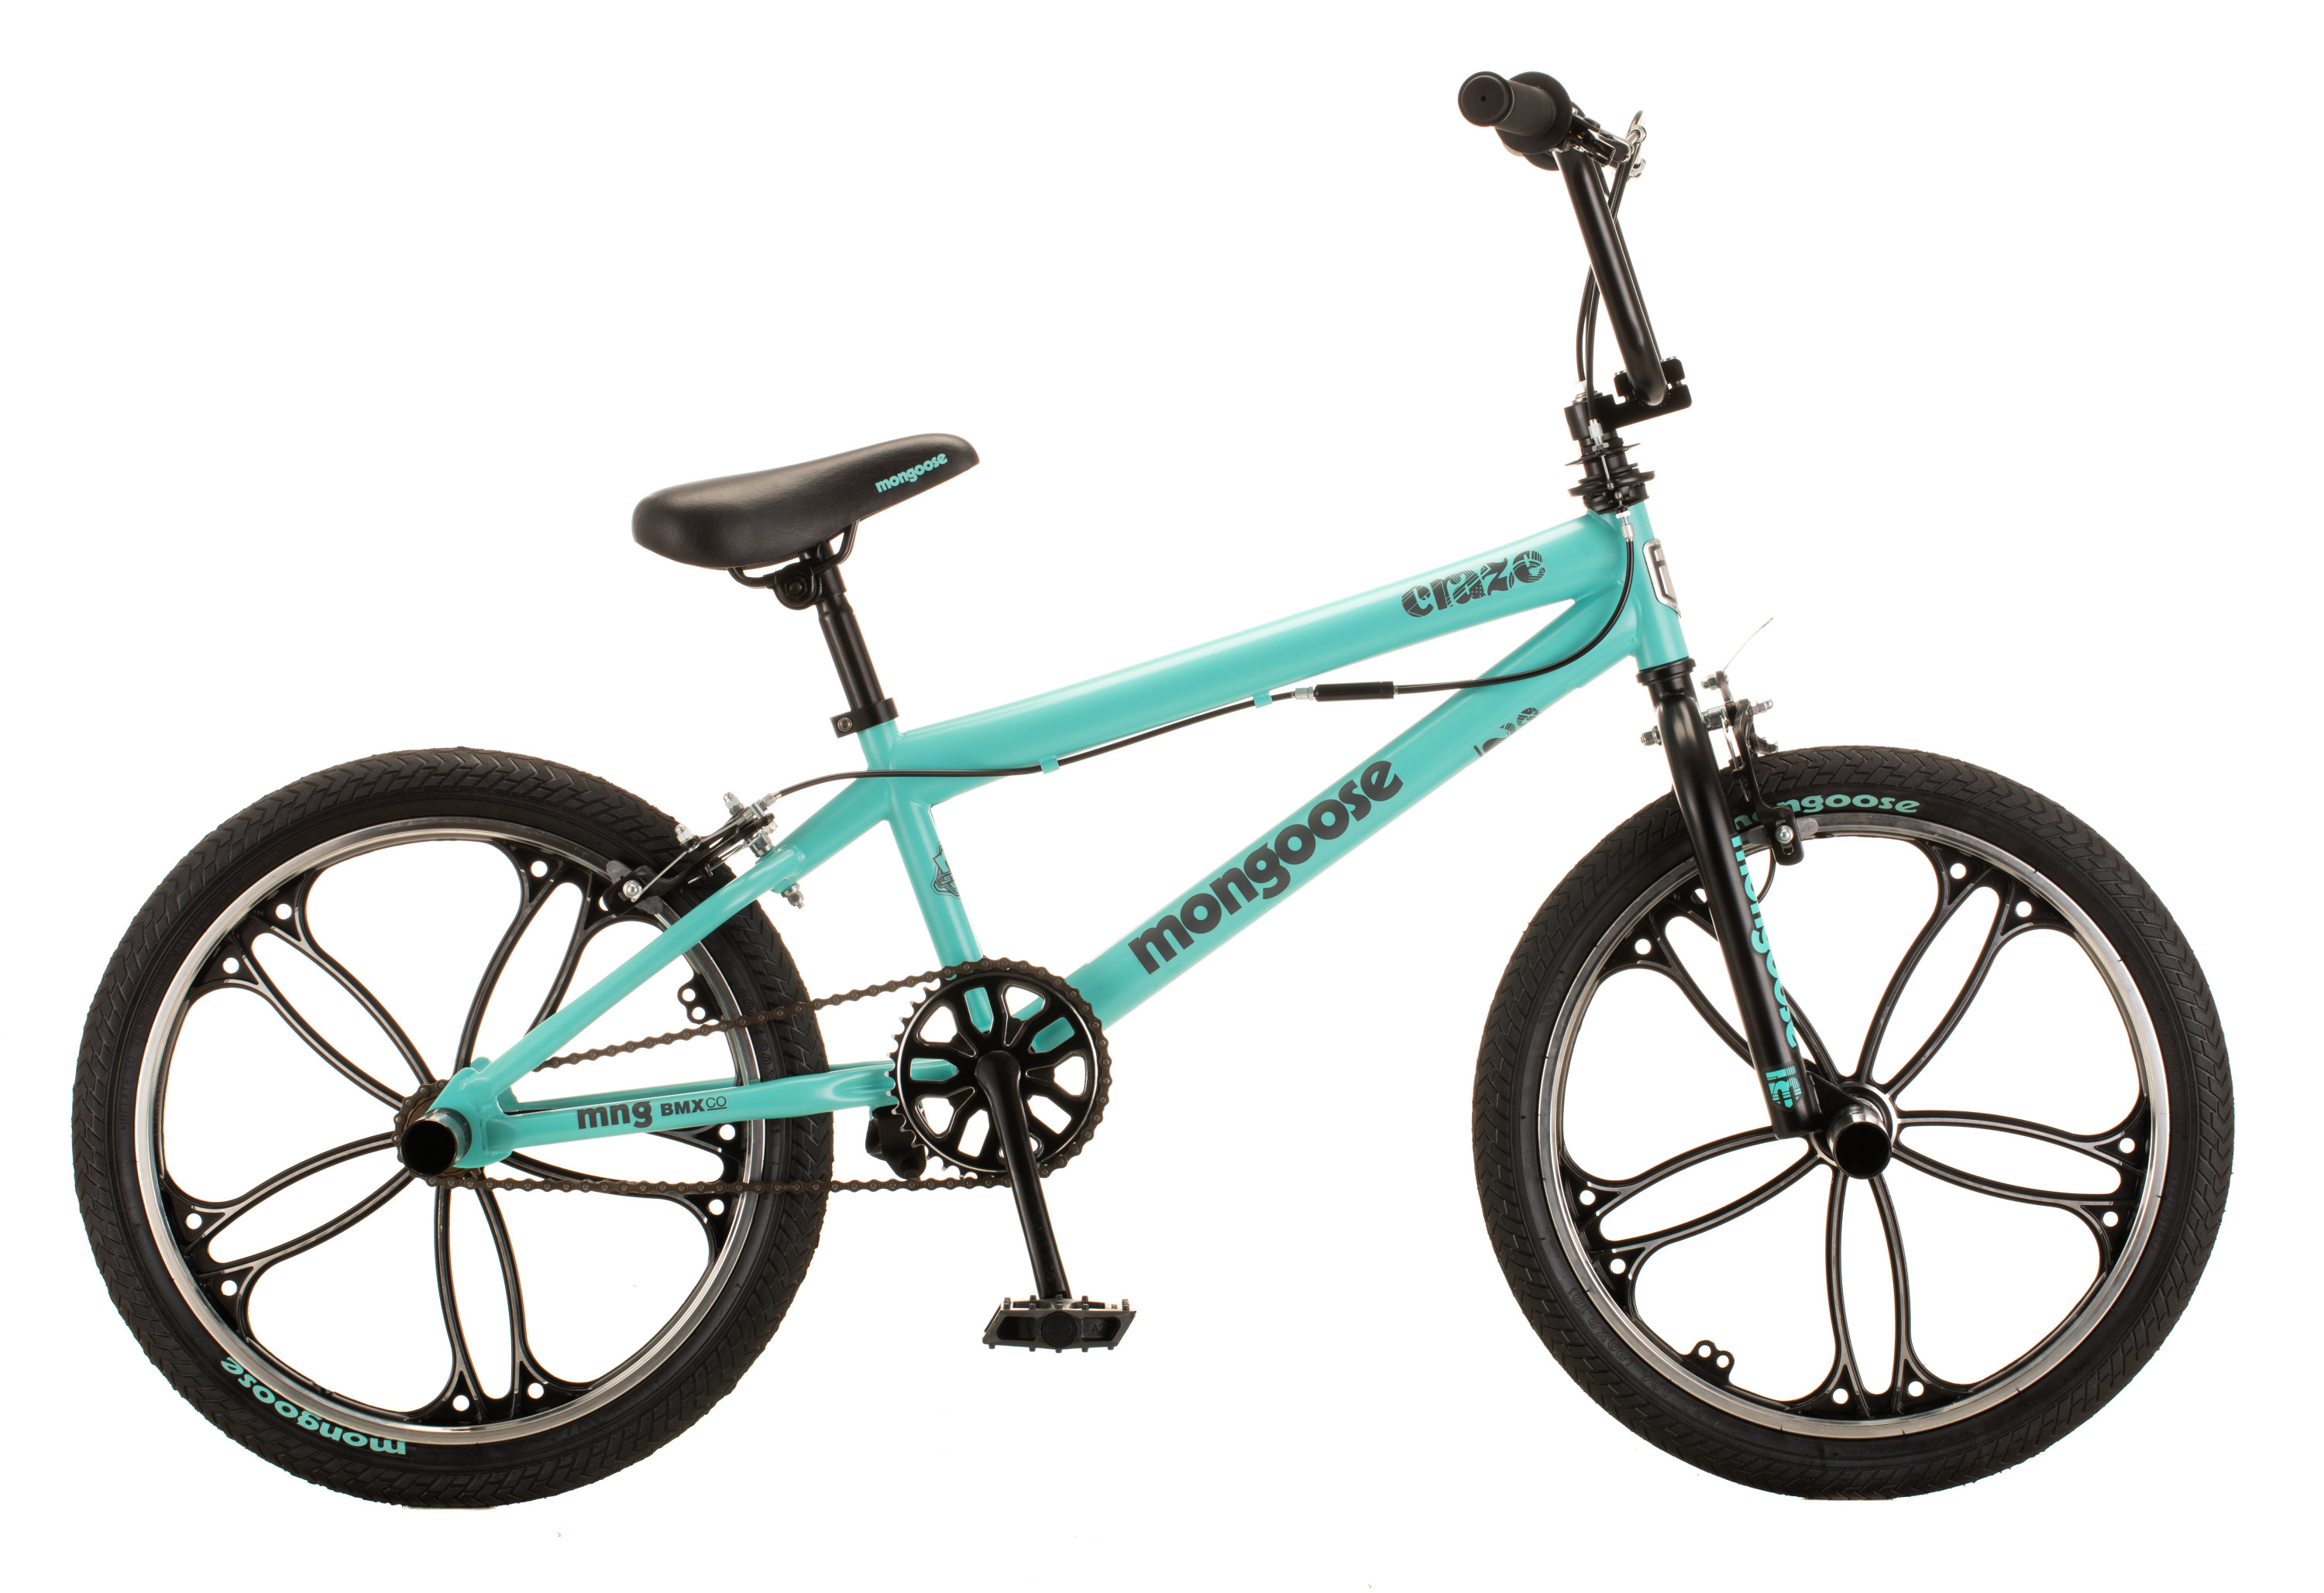 Mongoose Craze Boys and Girls 20 inch Kids BMX Bike, Ages 6+, Black and Mint - image 1 of 10